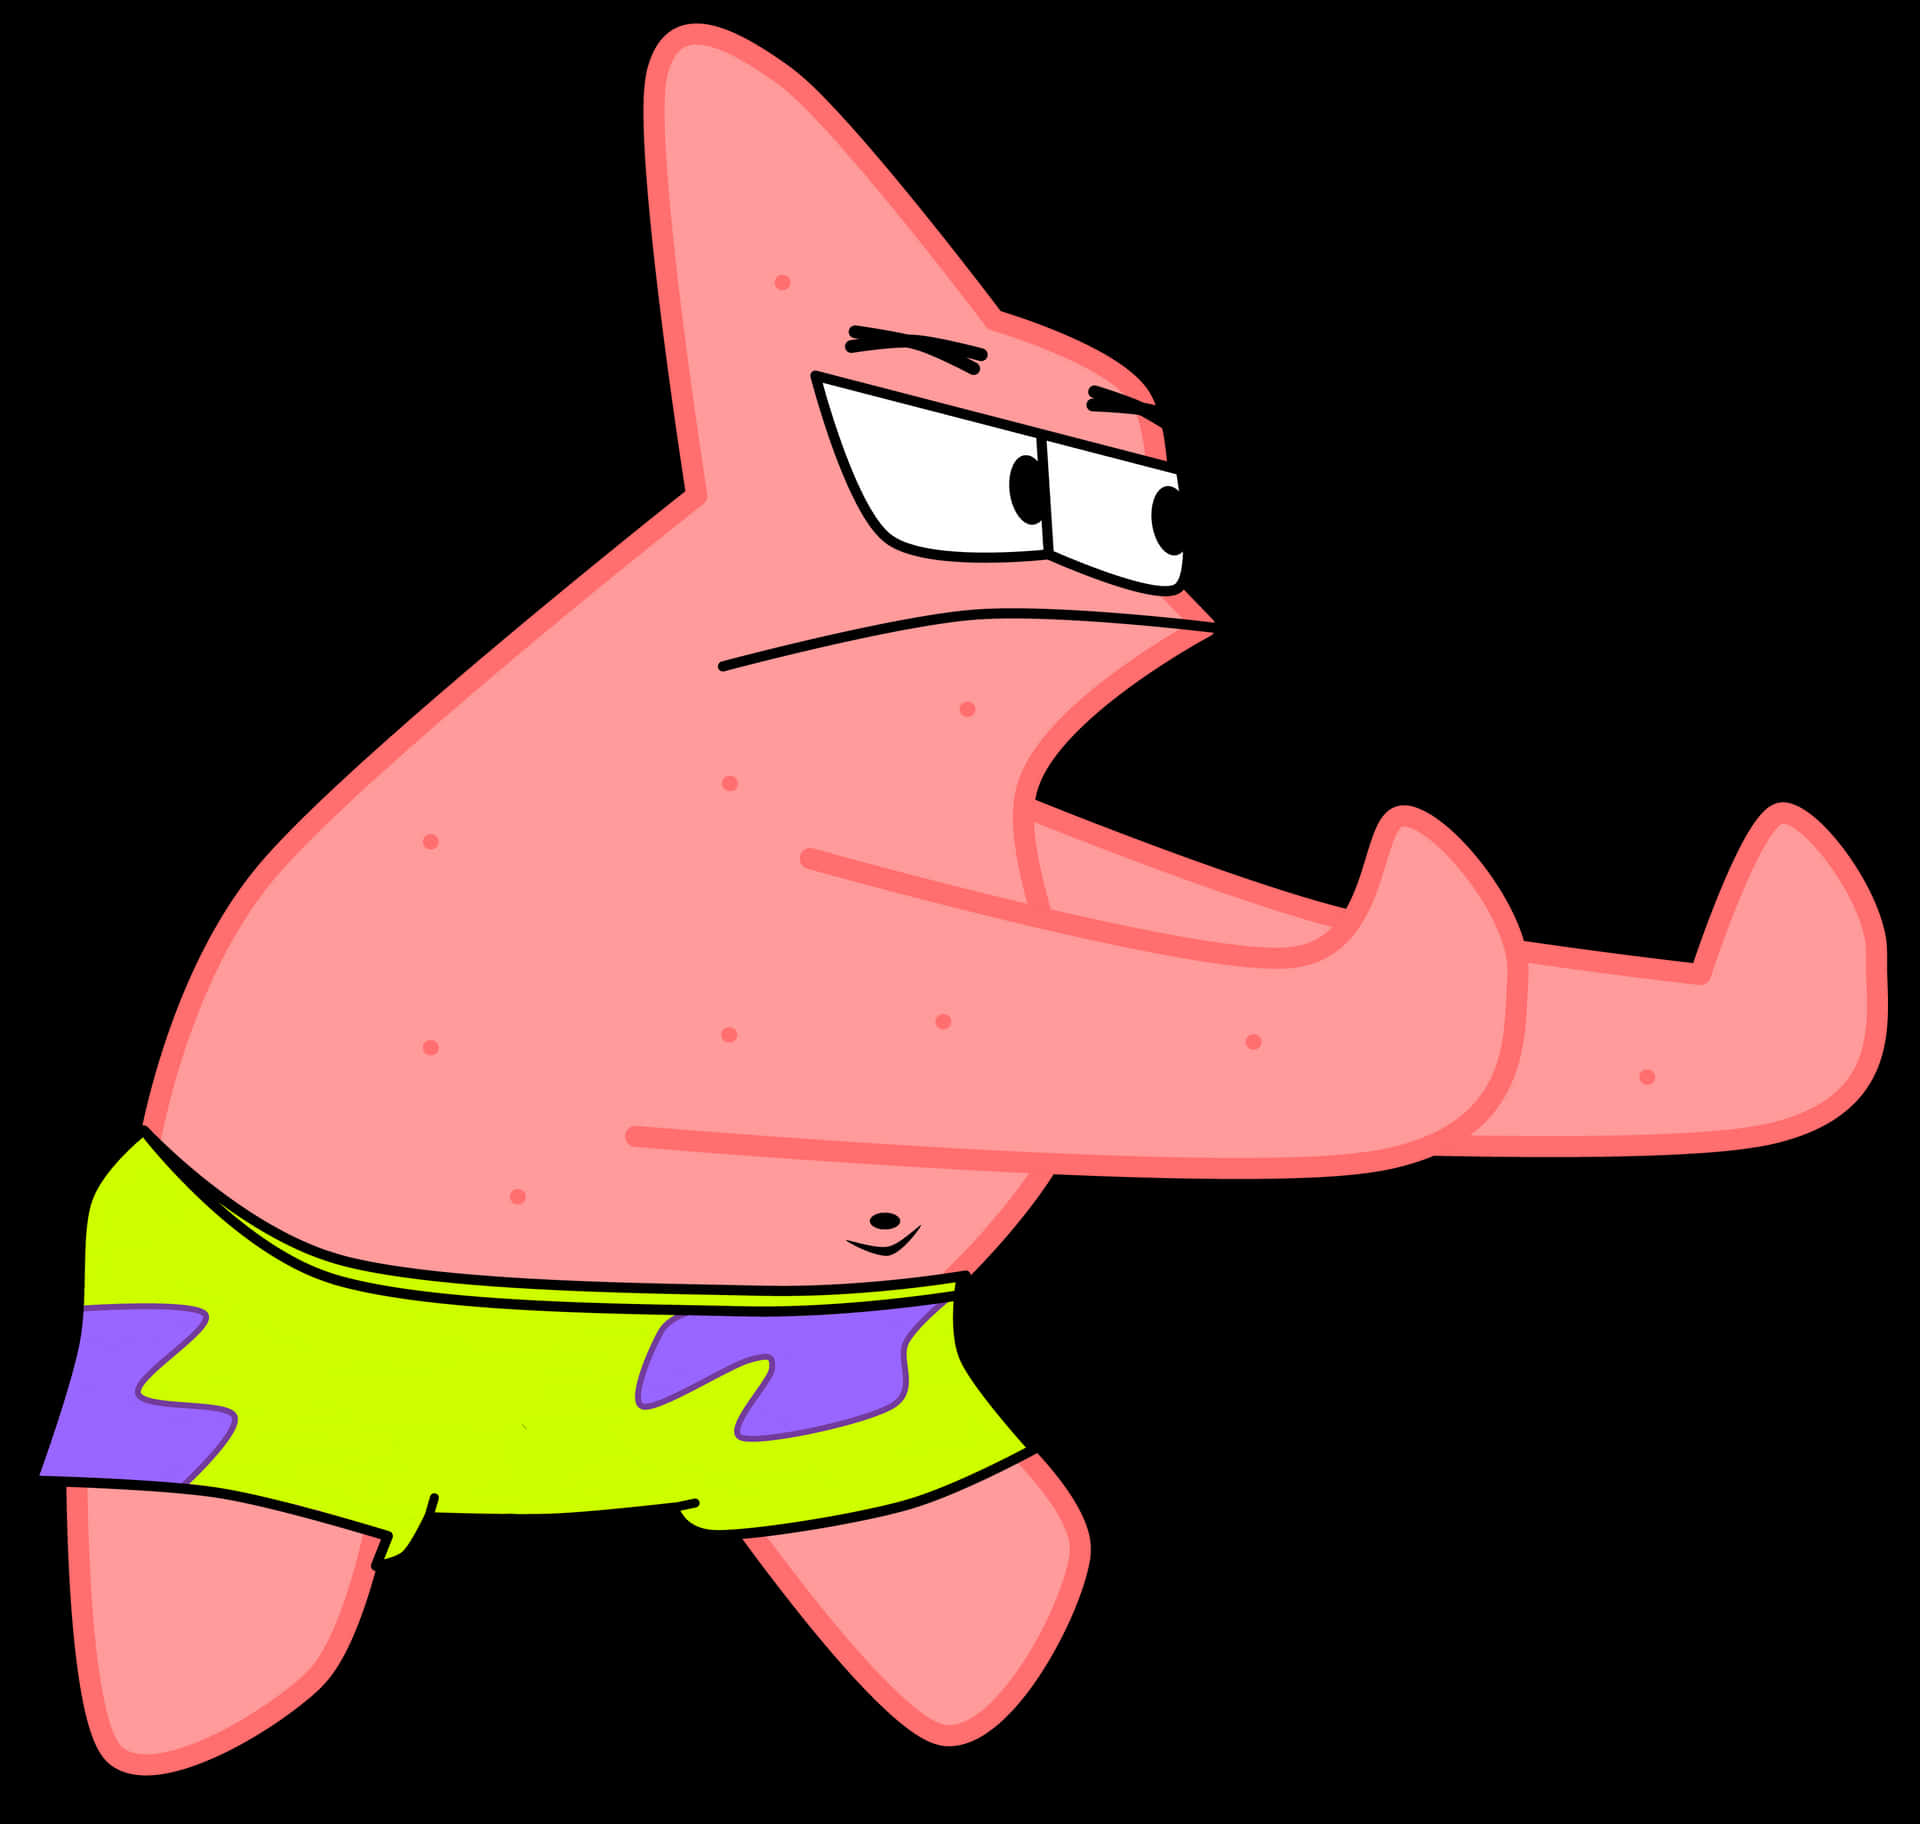 Patrick Star is Ready to Make Someone Laugh